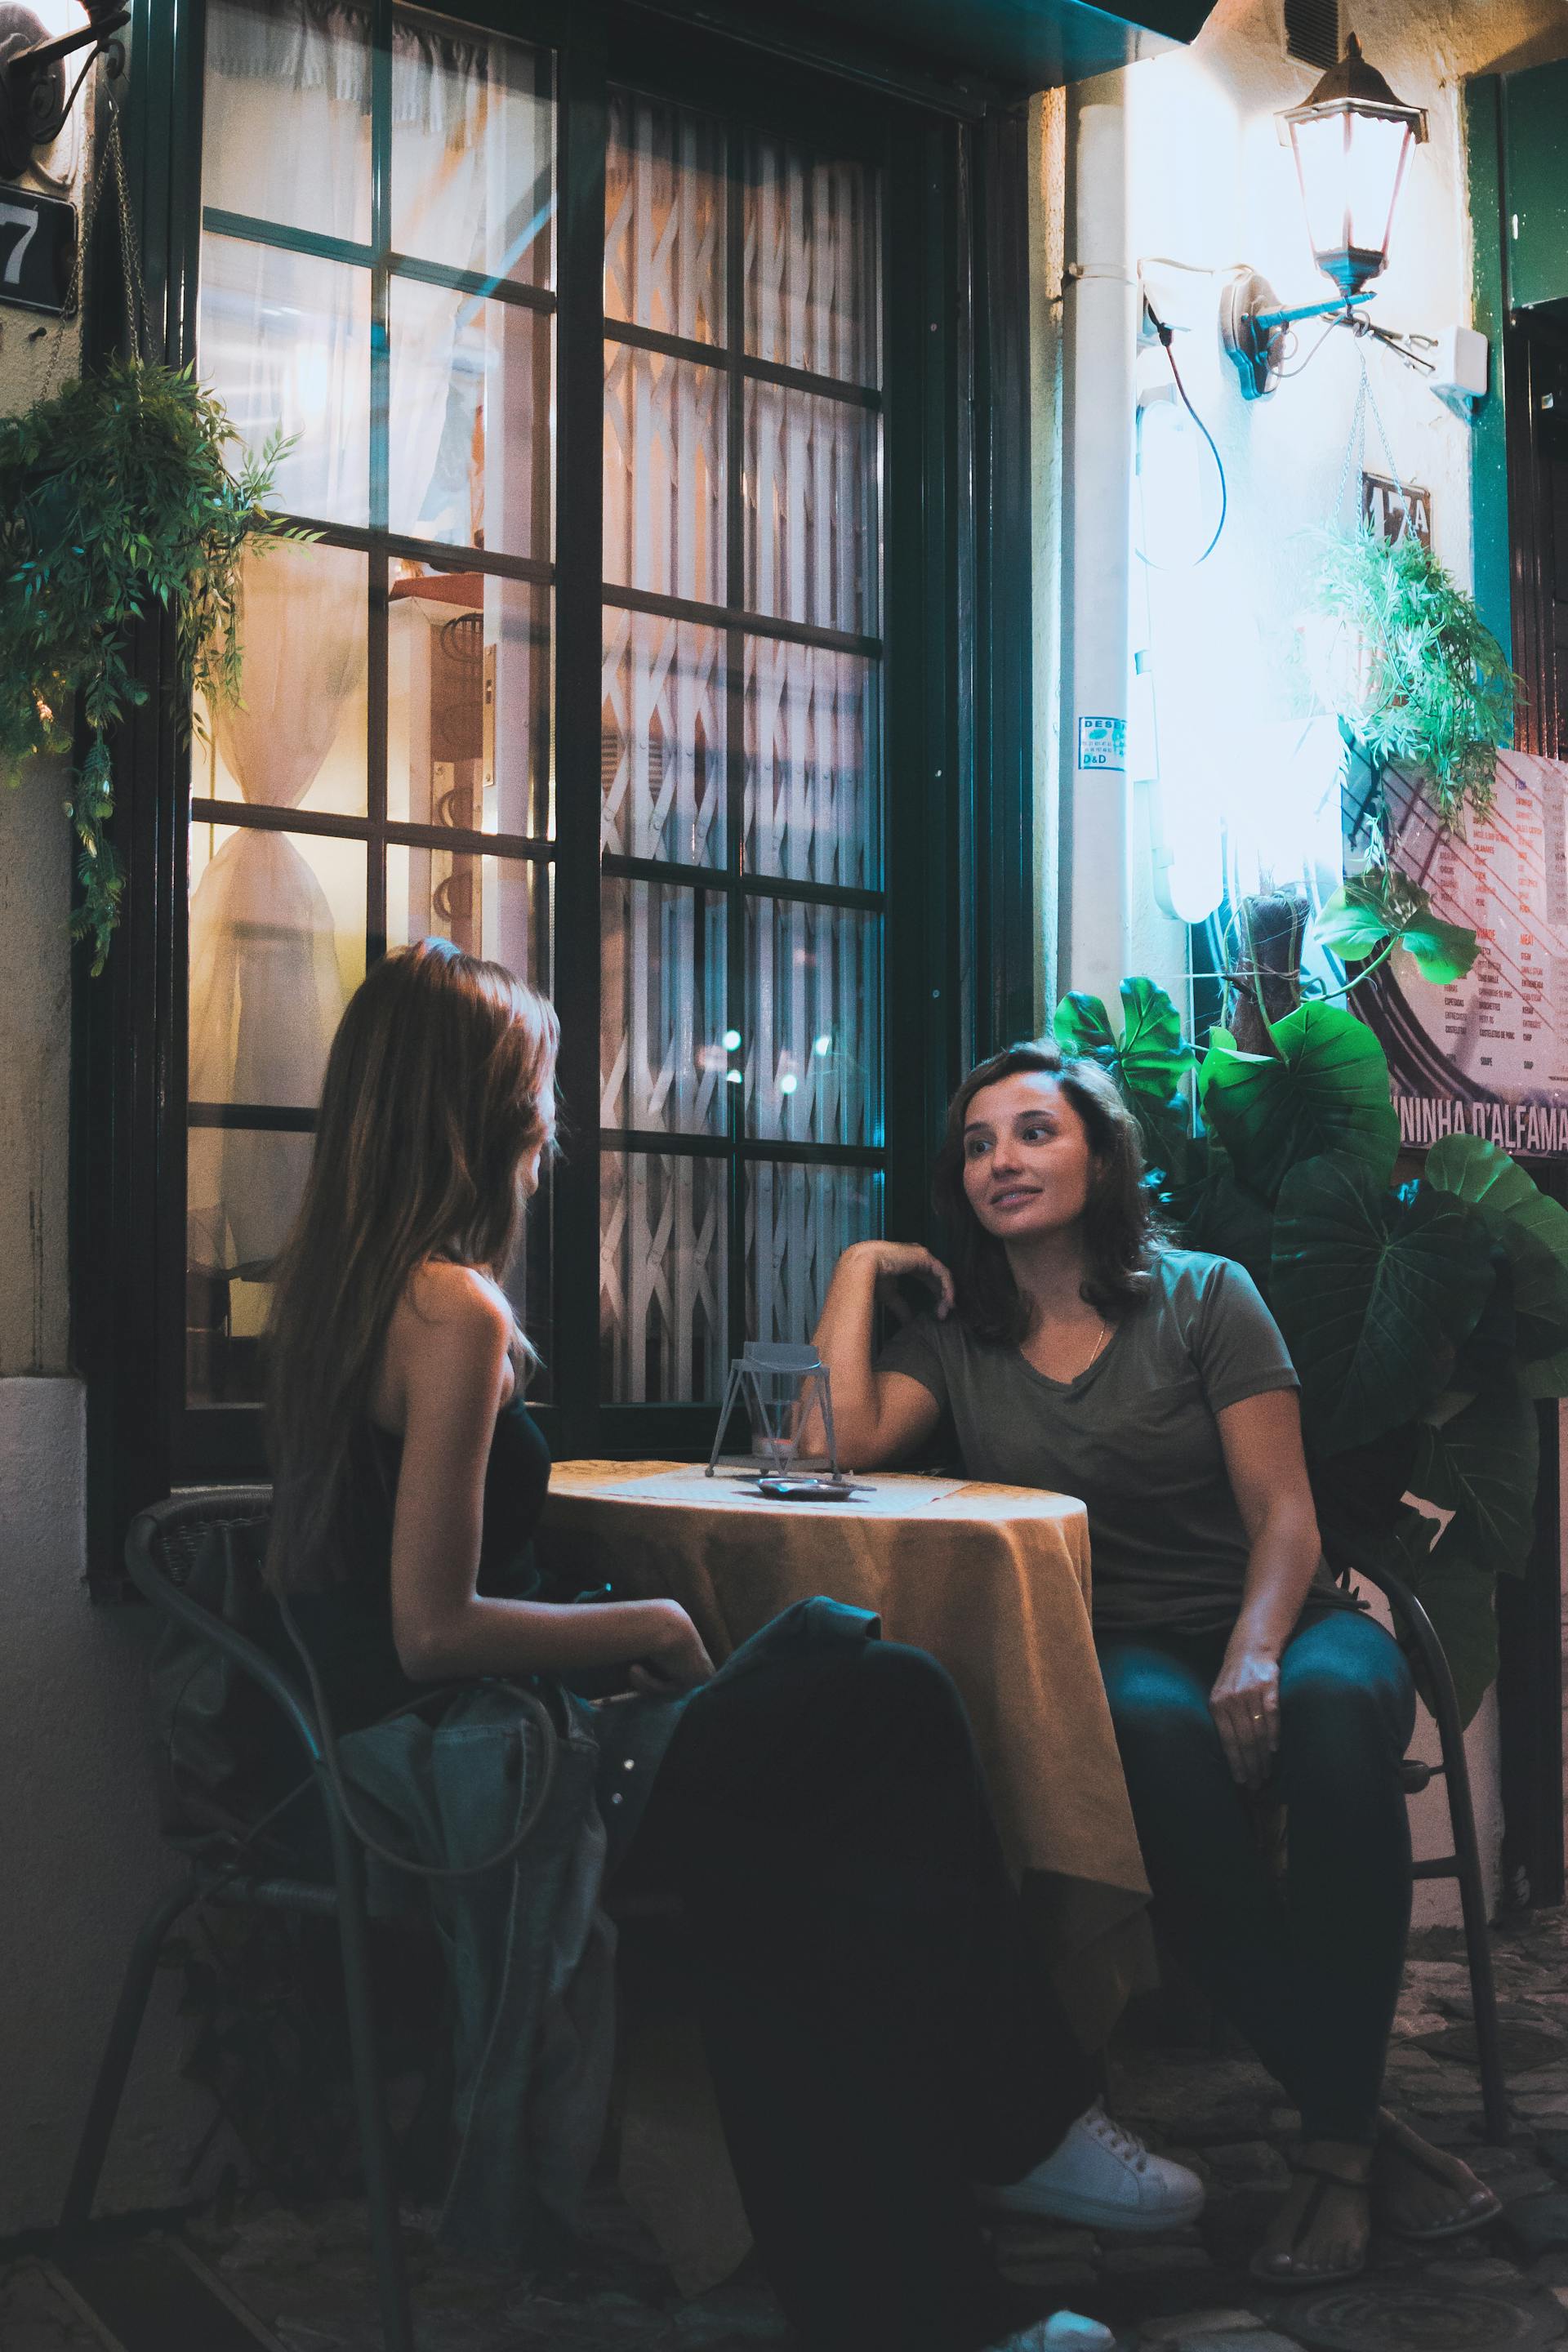 Two women chatting in an outdoor café | Source: Pexels